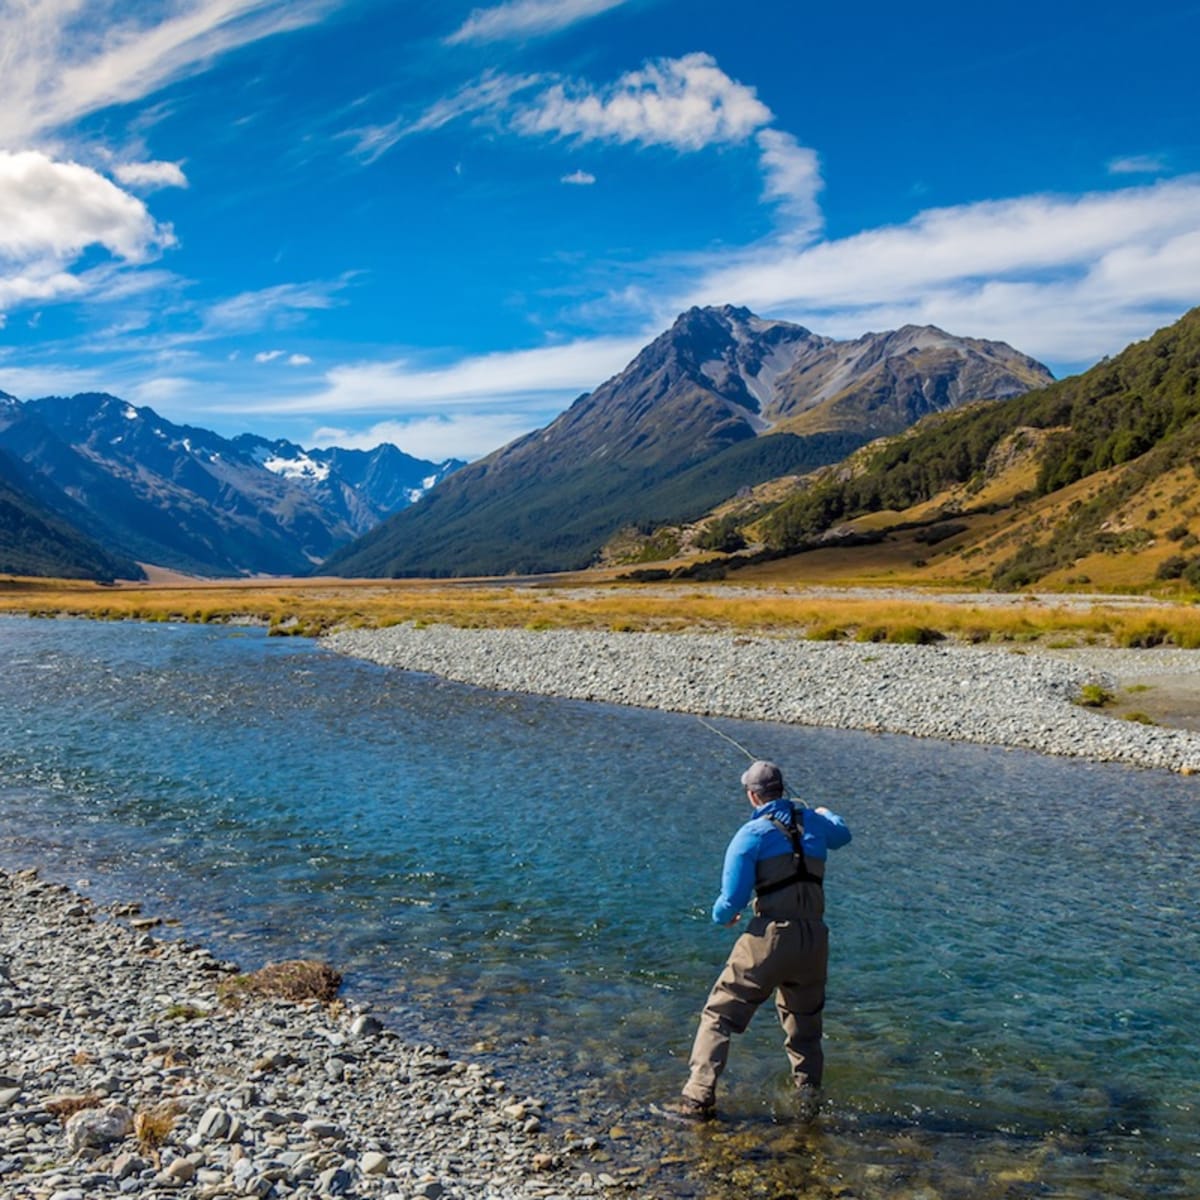 A beginner's guide to fly fishing: Everything you need to know - The Manual